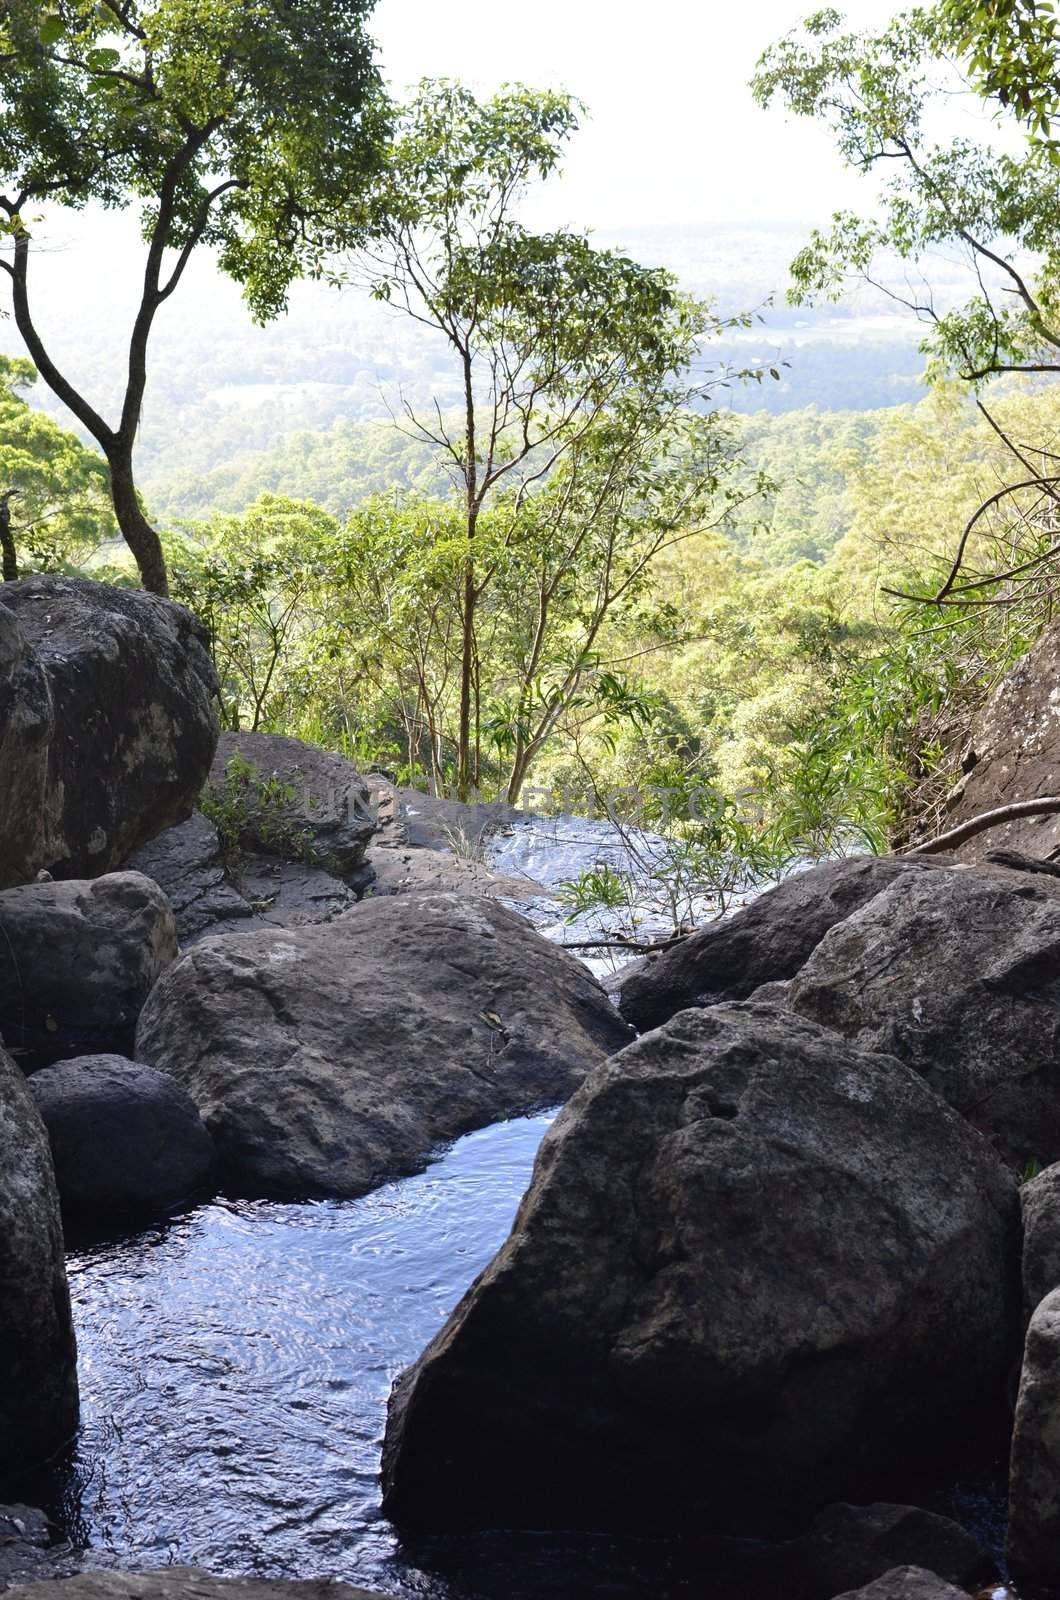 The top of Cameron Falls in the Mt Tamborine National Park. In the background is the Beaudesert district of south east Queensland.